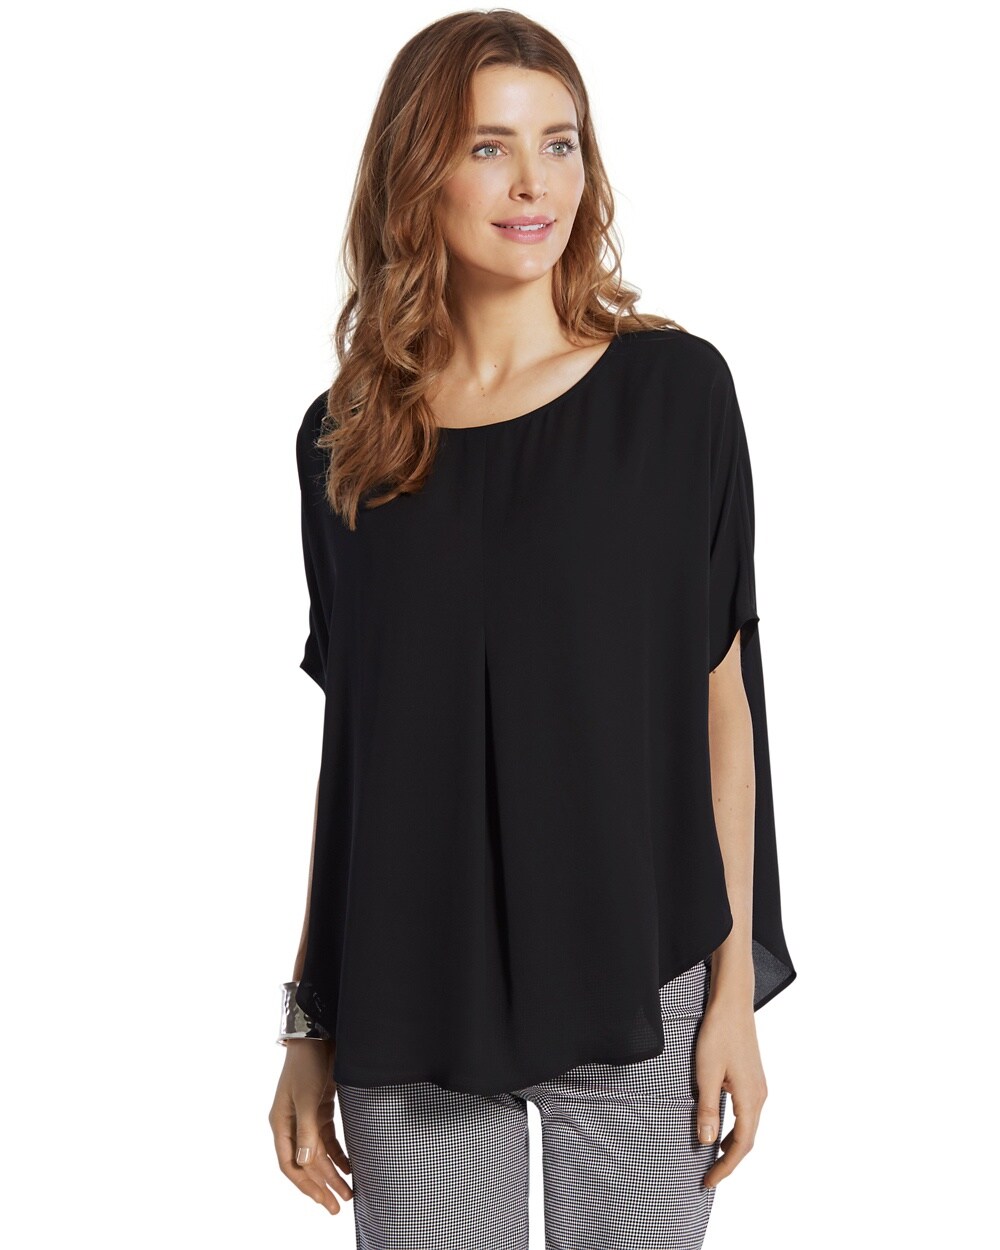 Simple Smooth Scarlett Top - Chico's